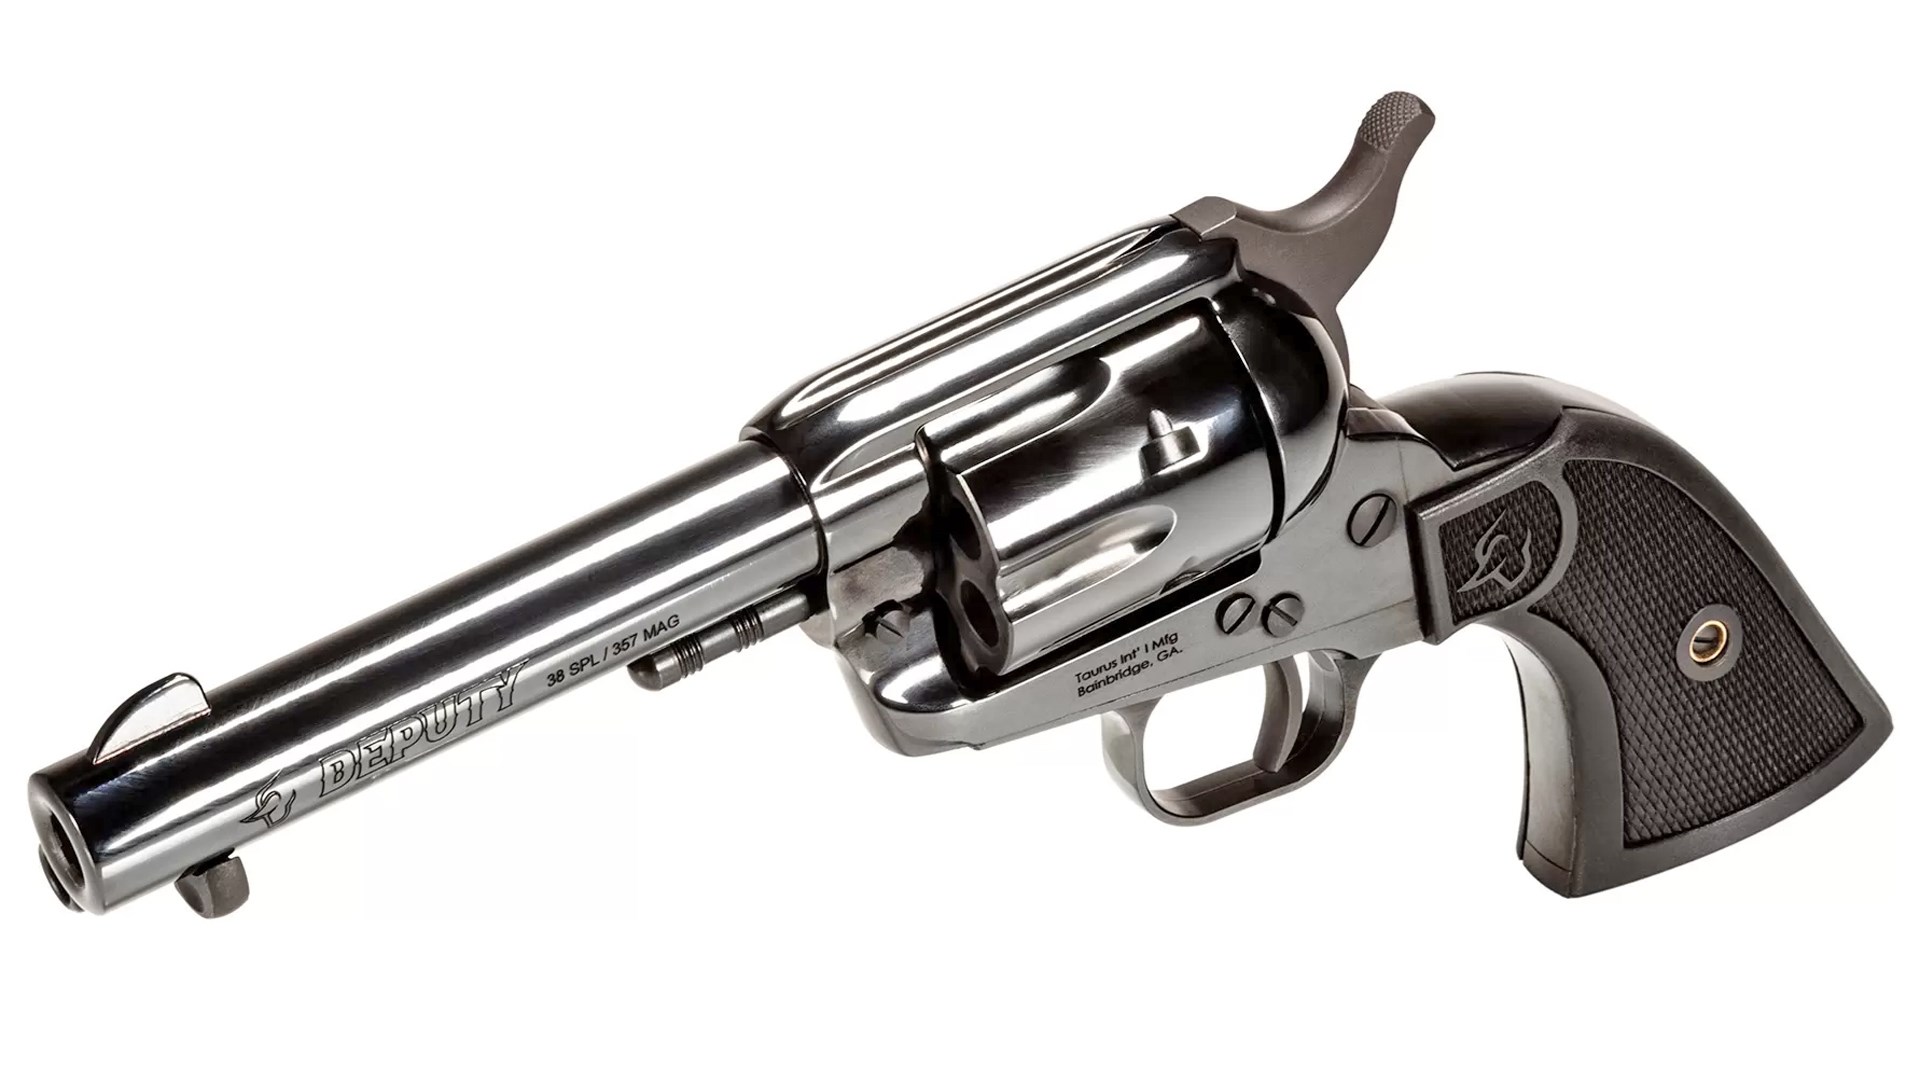 Left side angled shot of the Taurus Deputy single-action revolver, showing the top of the barrel and frame.